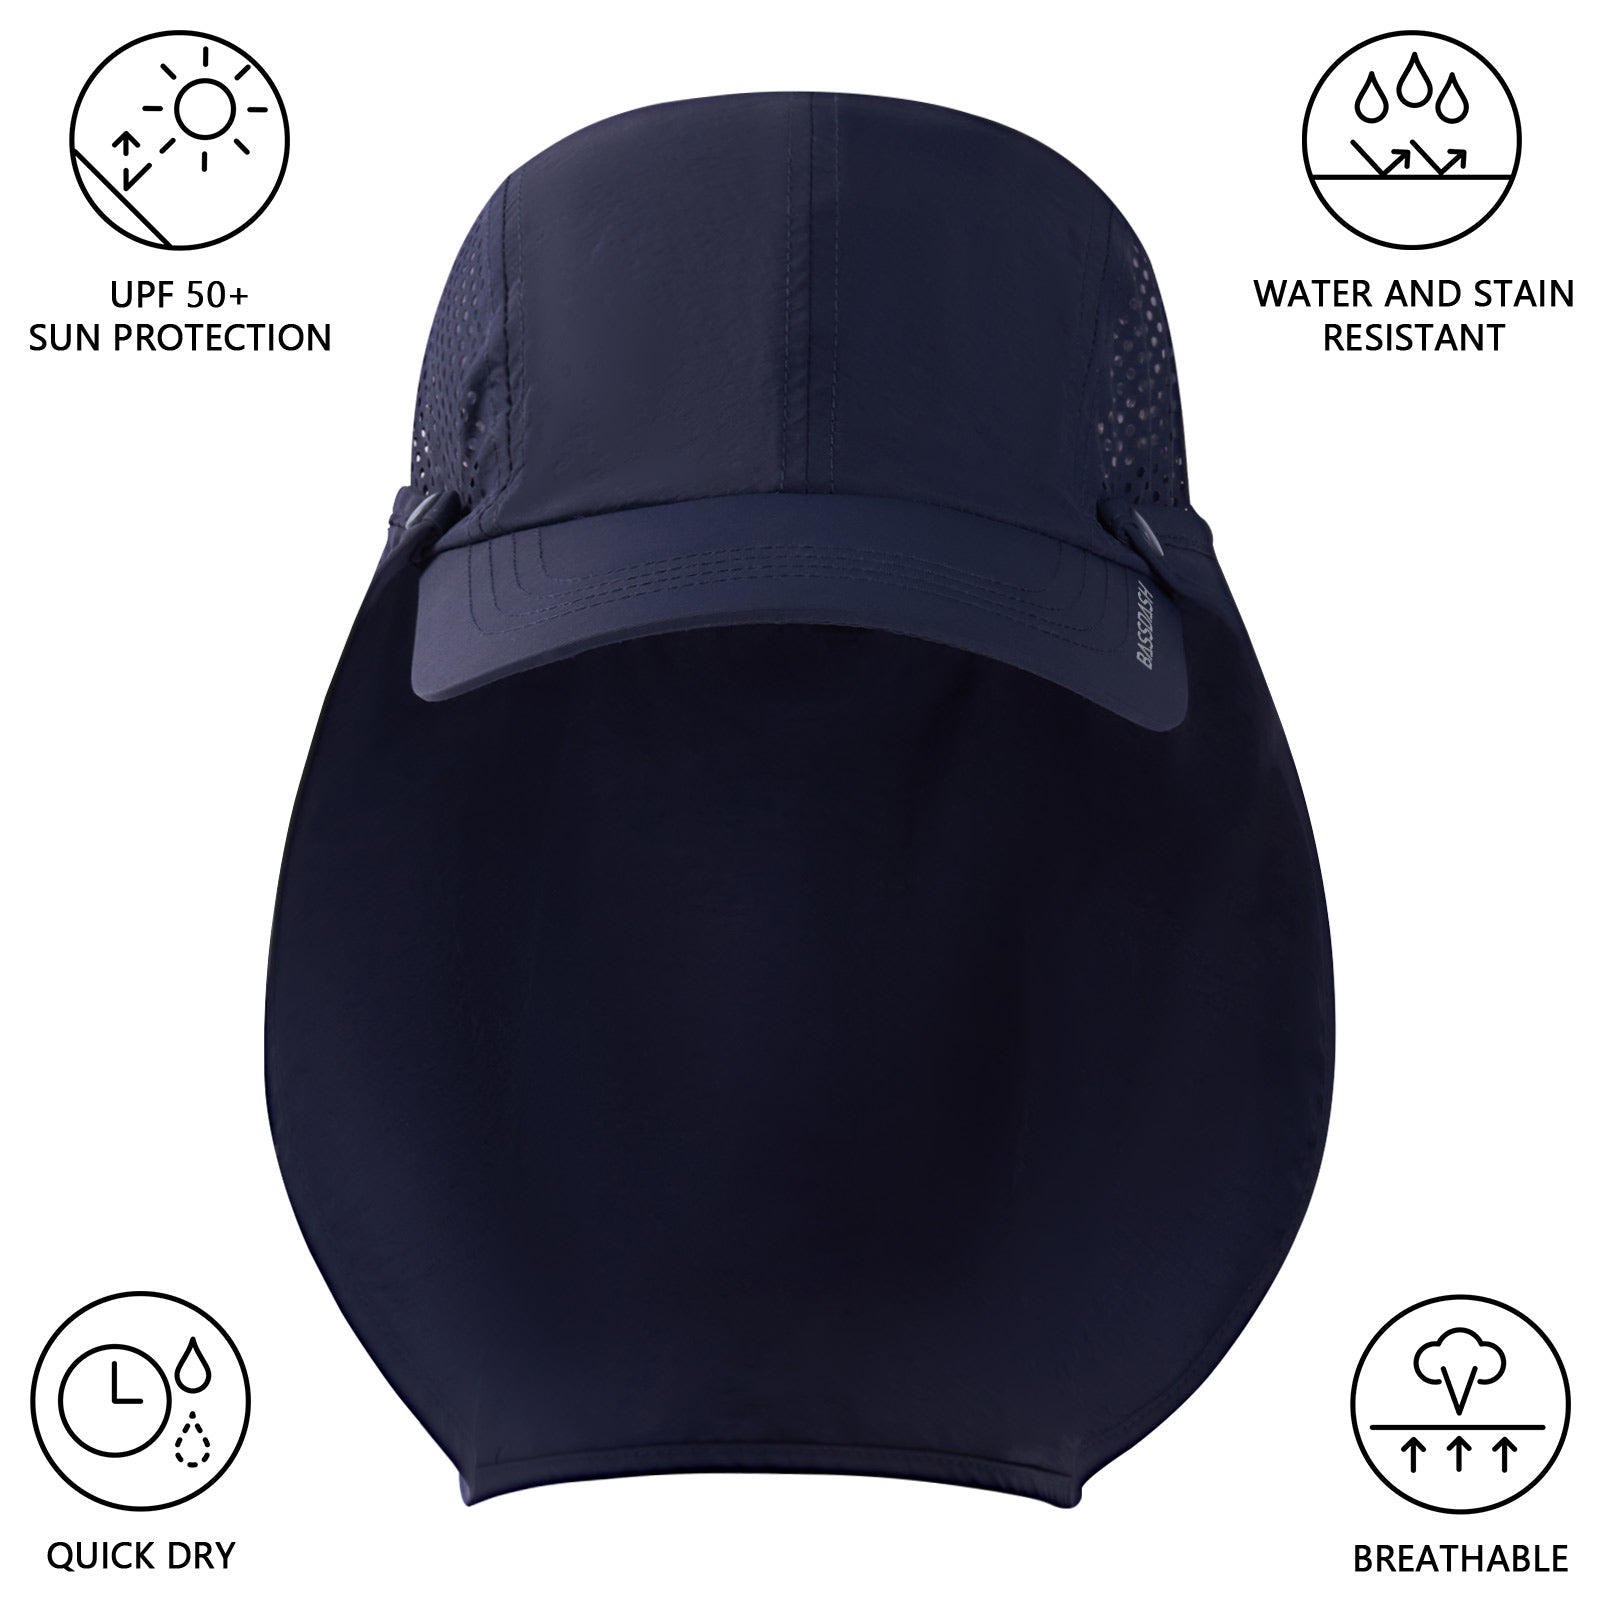 Packable Sun Hat with Removable Neck Flap | Bassdash Fishing Dark Blue with Foldable Brim / One Size